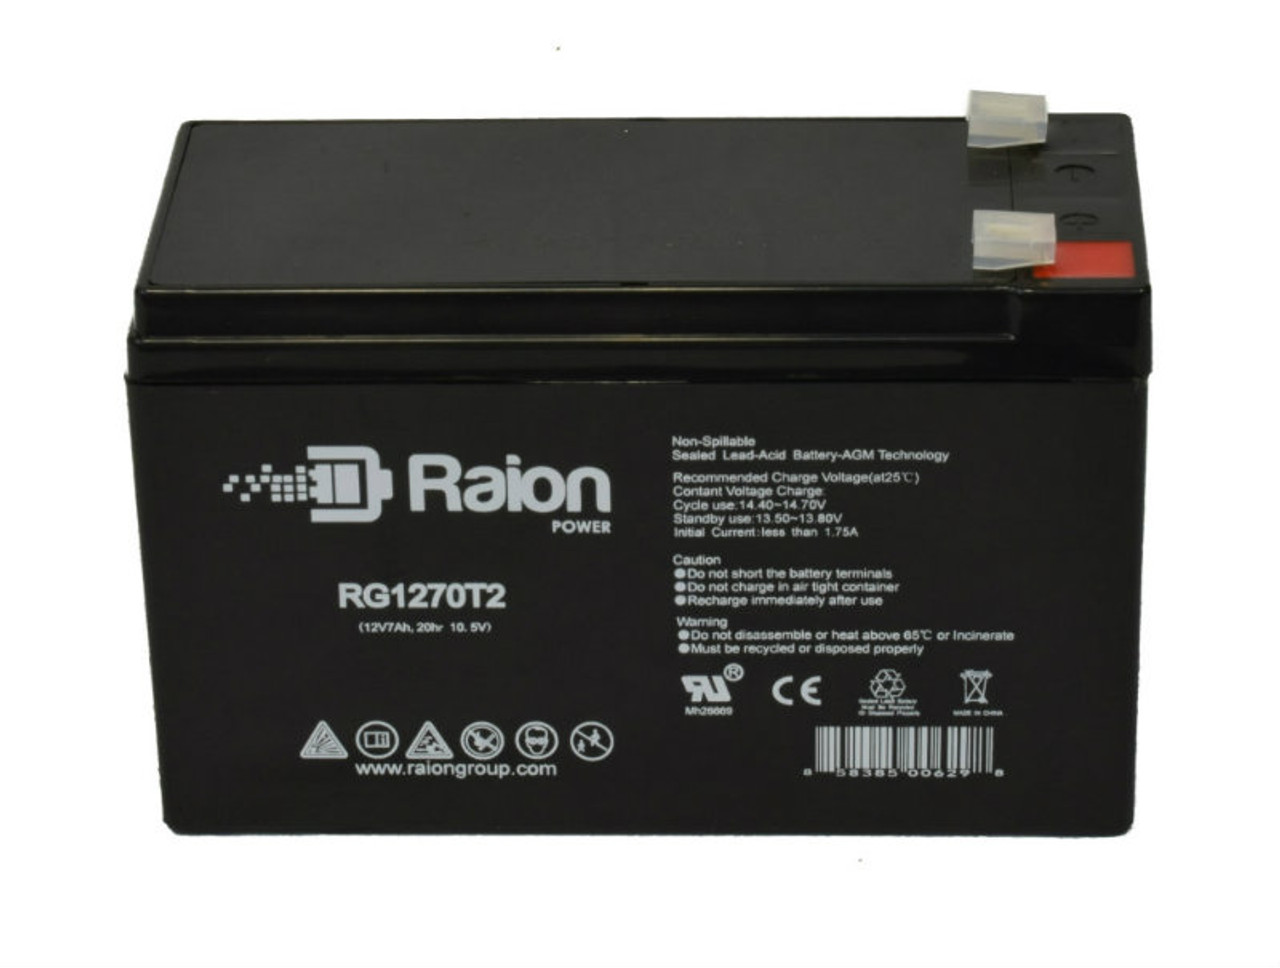 Raion Power RG1270T2 12V 7Ah Lead Acid Battery for Cellpower CPW 35-12 L